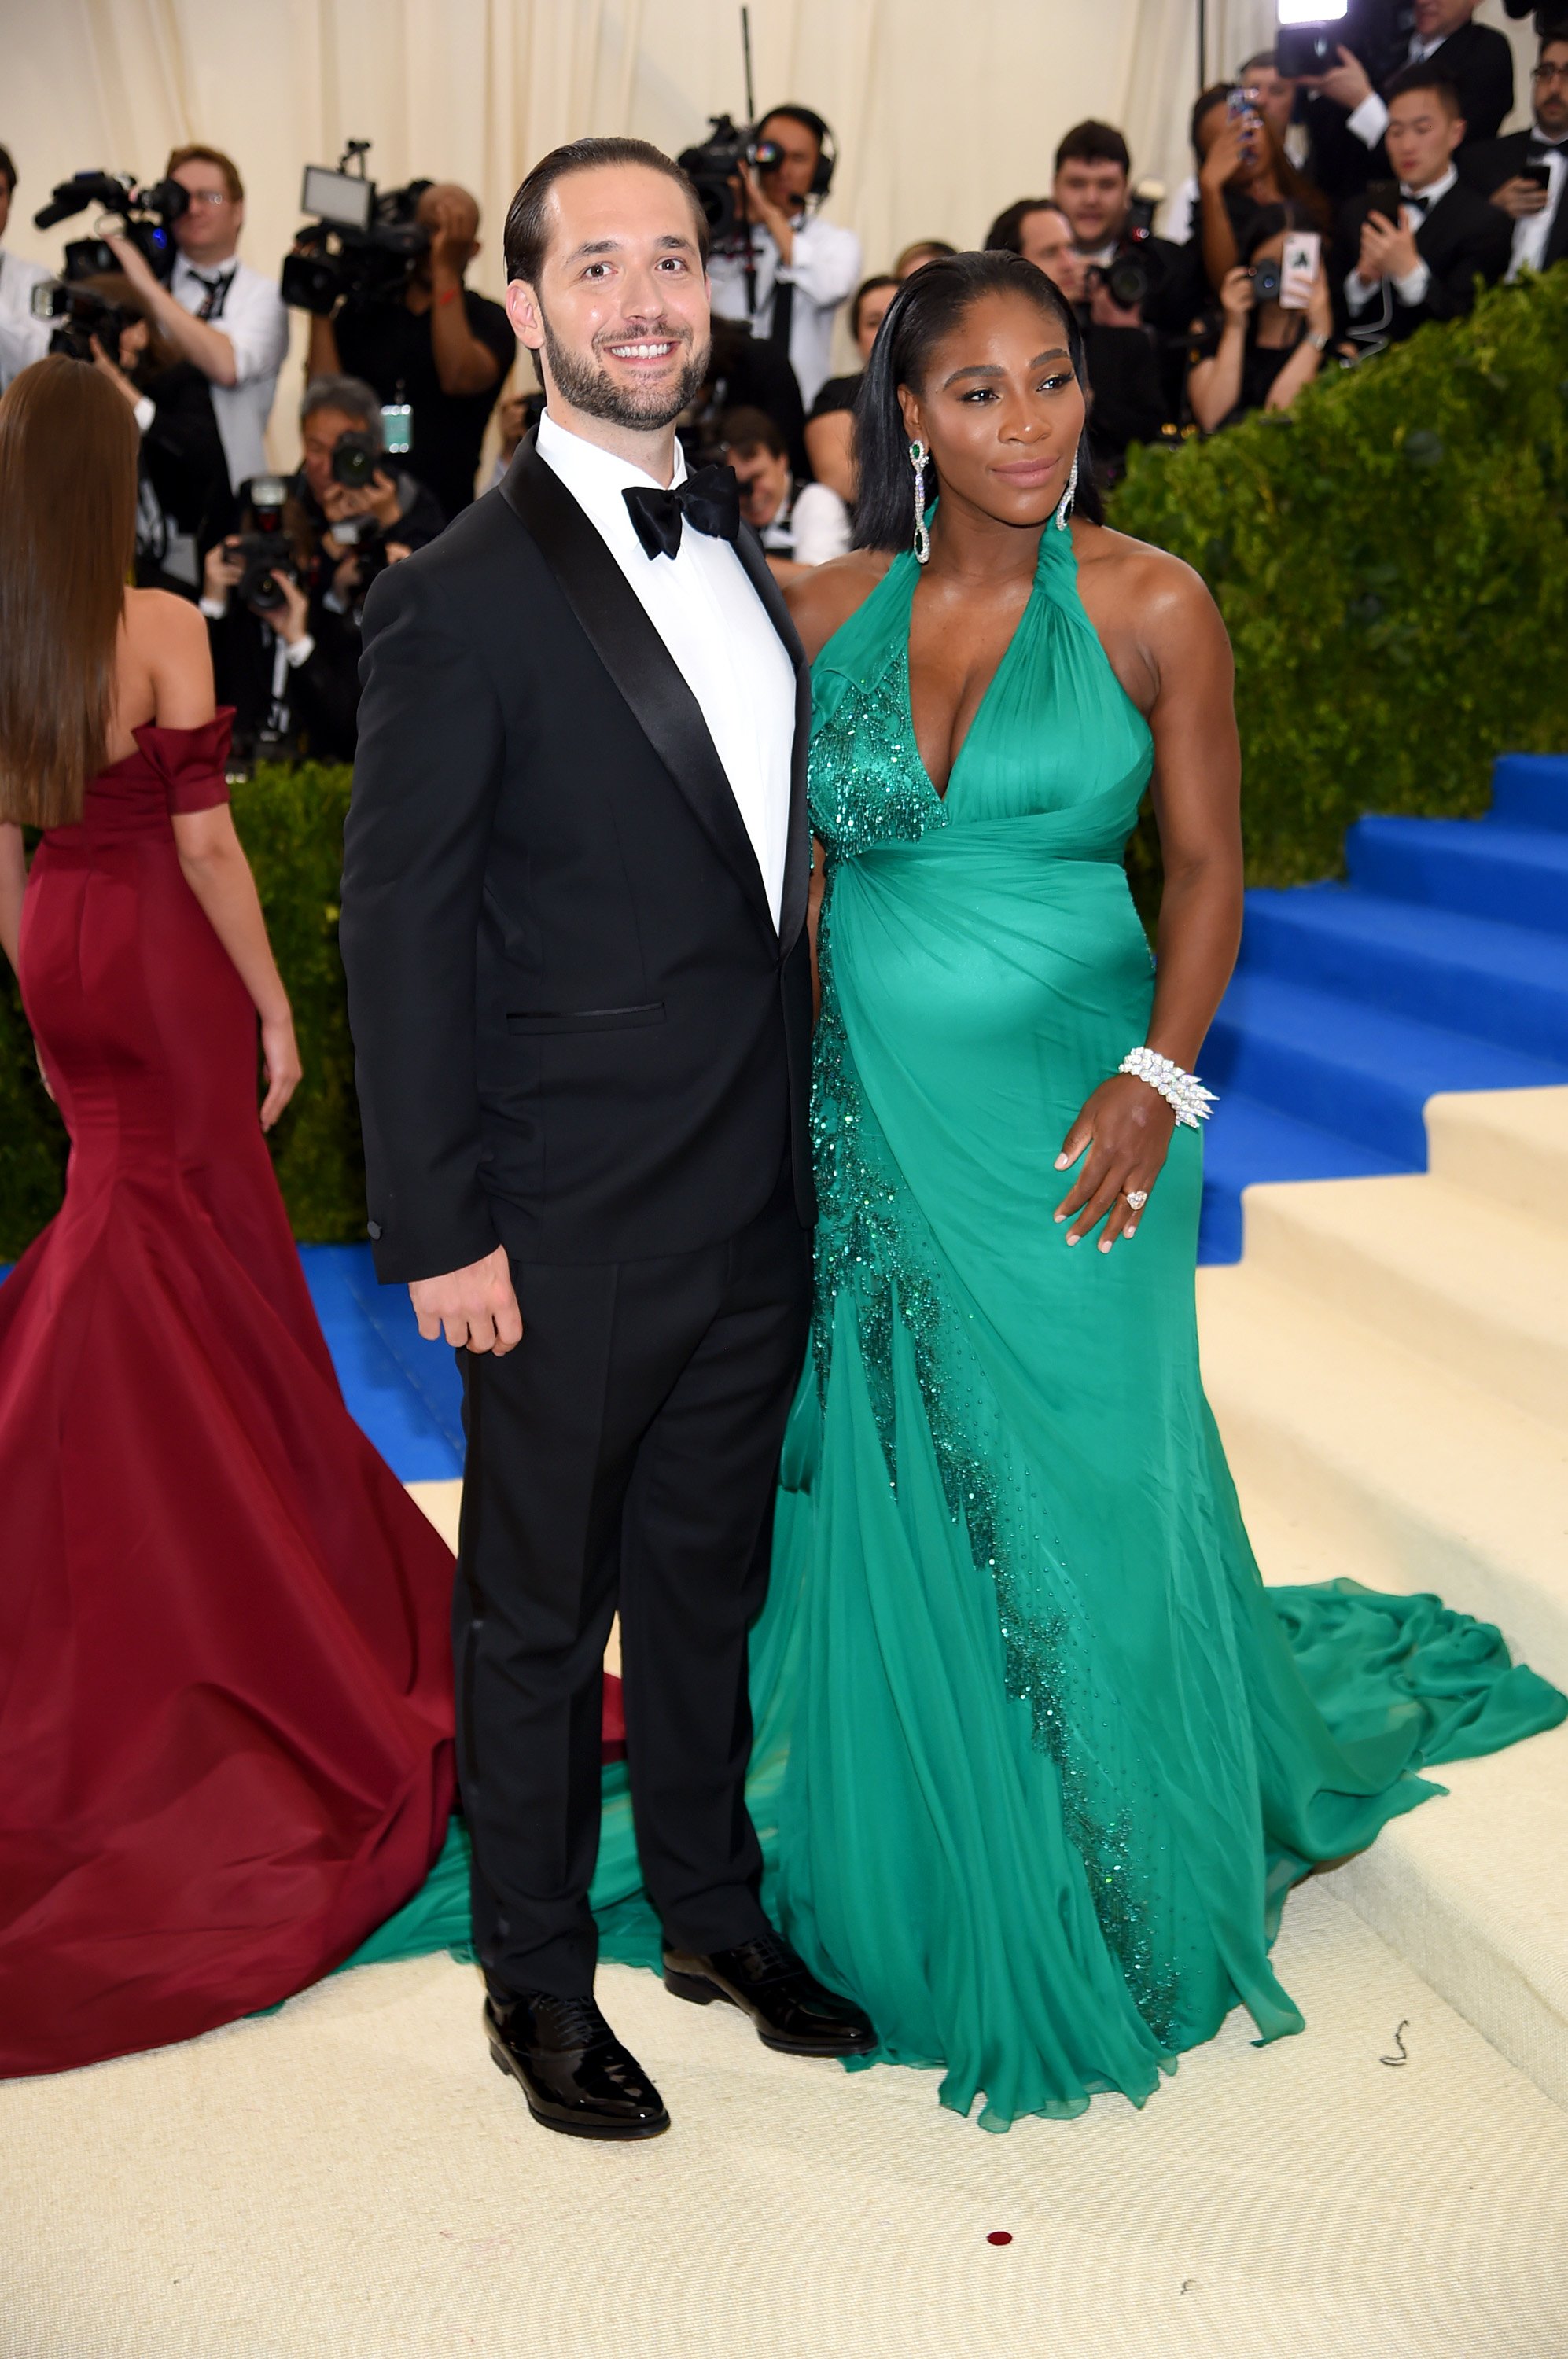 Serena Williams and her husband Alexis Ohanian during the Met Gala. | Source: Getty Images